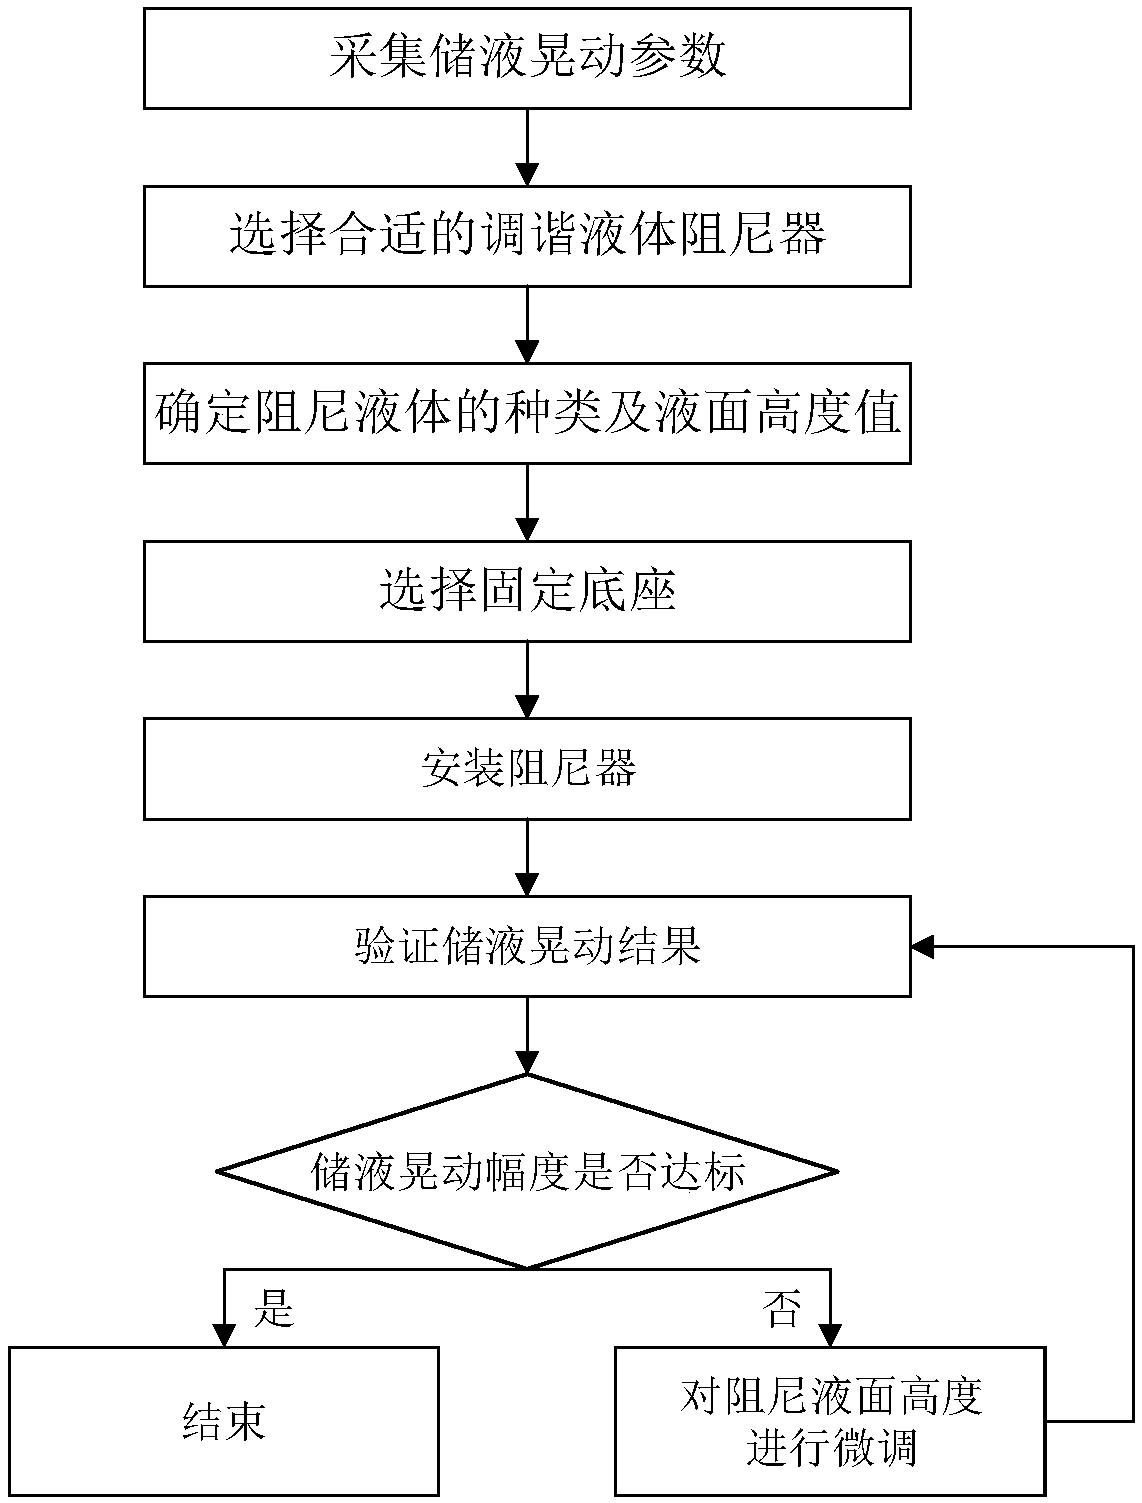 Storage liquid shaking control method of floating-type oil and gas production storage and discharging device